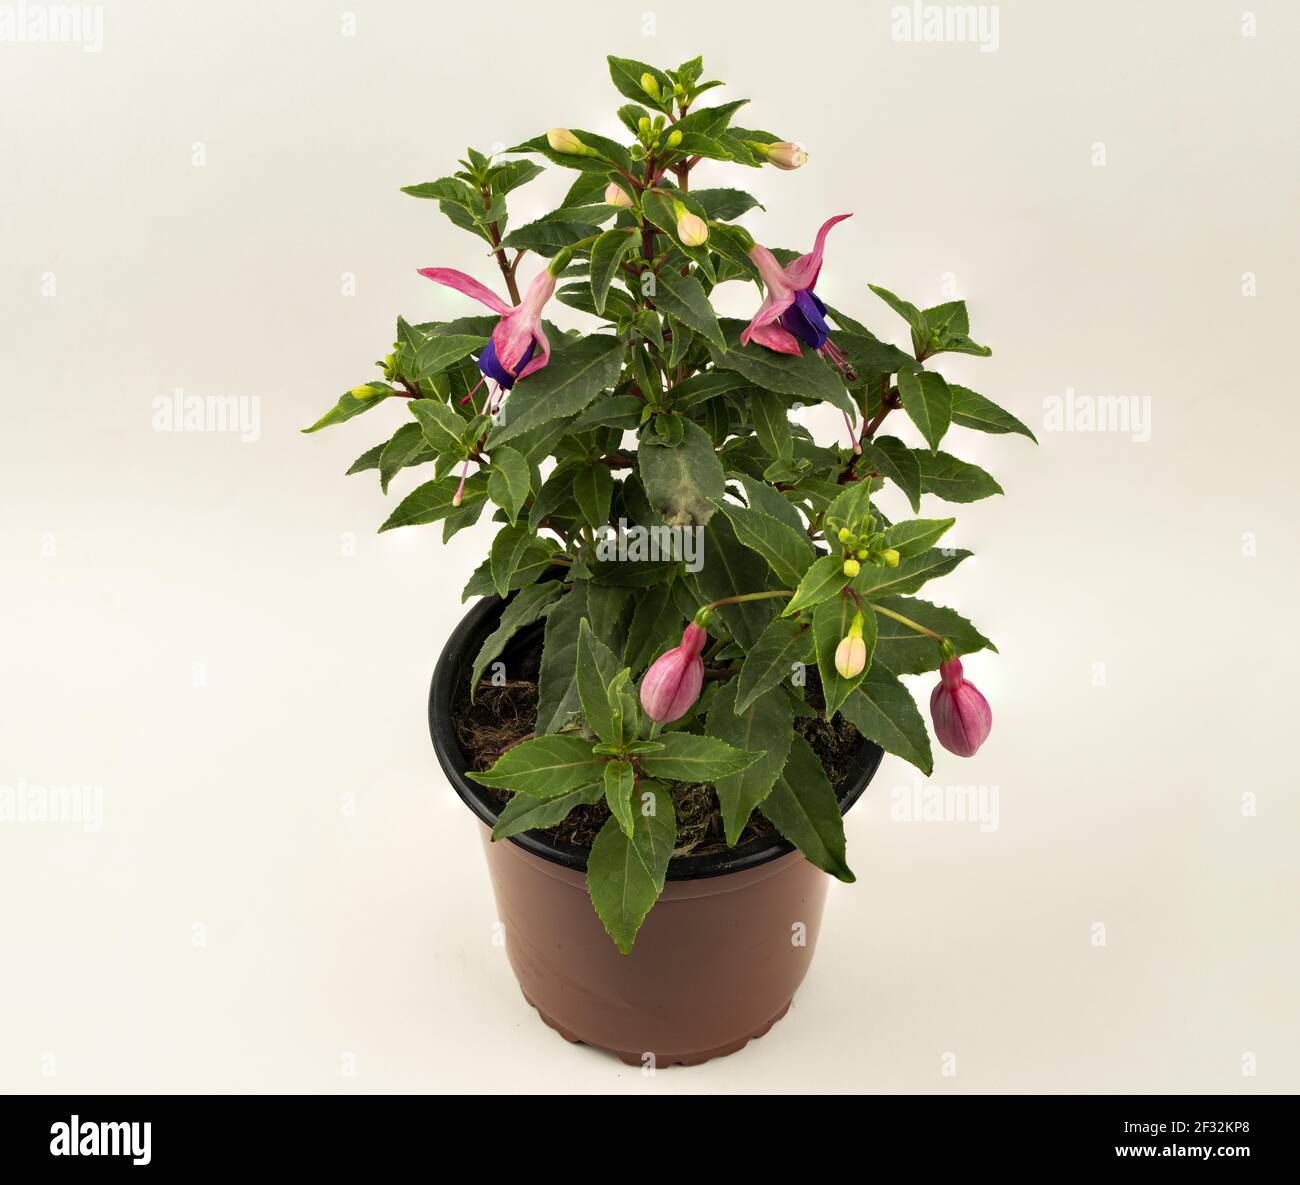 fuchsia magellanica in flowerpot with white background, top view Stock Photo